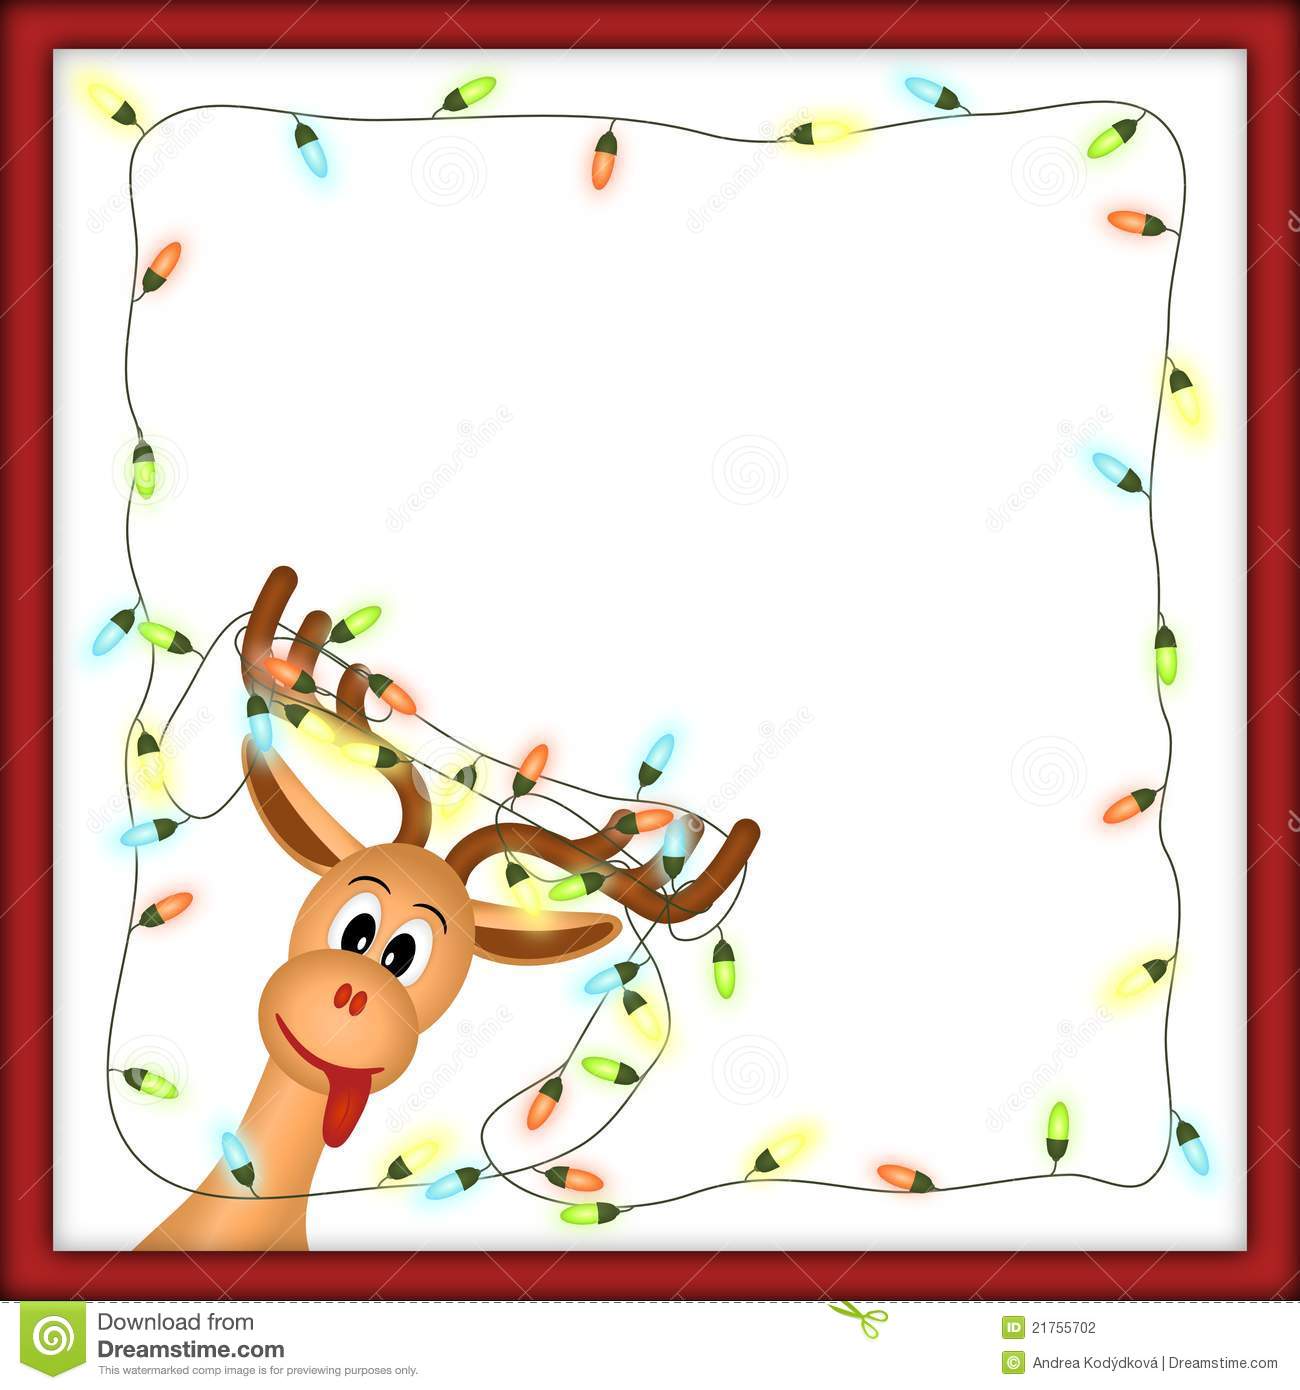 Funny Reindeer With Christmas Lights Tangled In Antlers In Red Frame